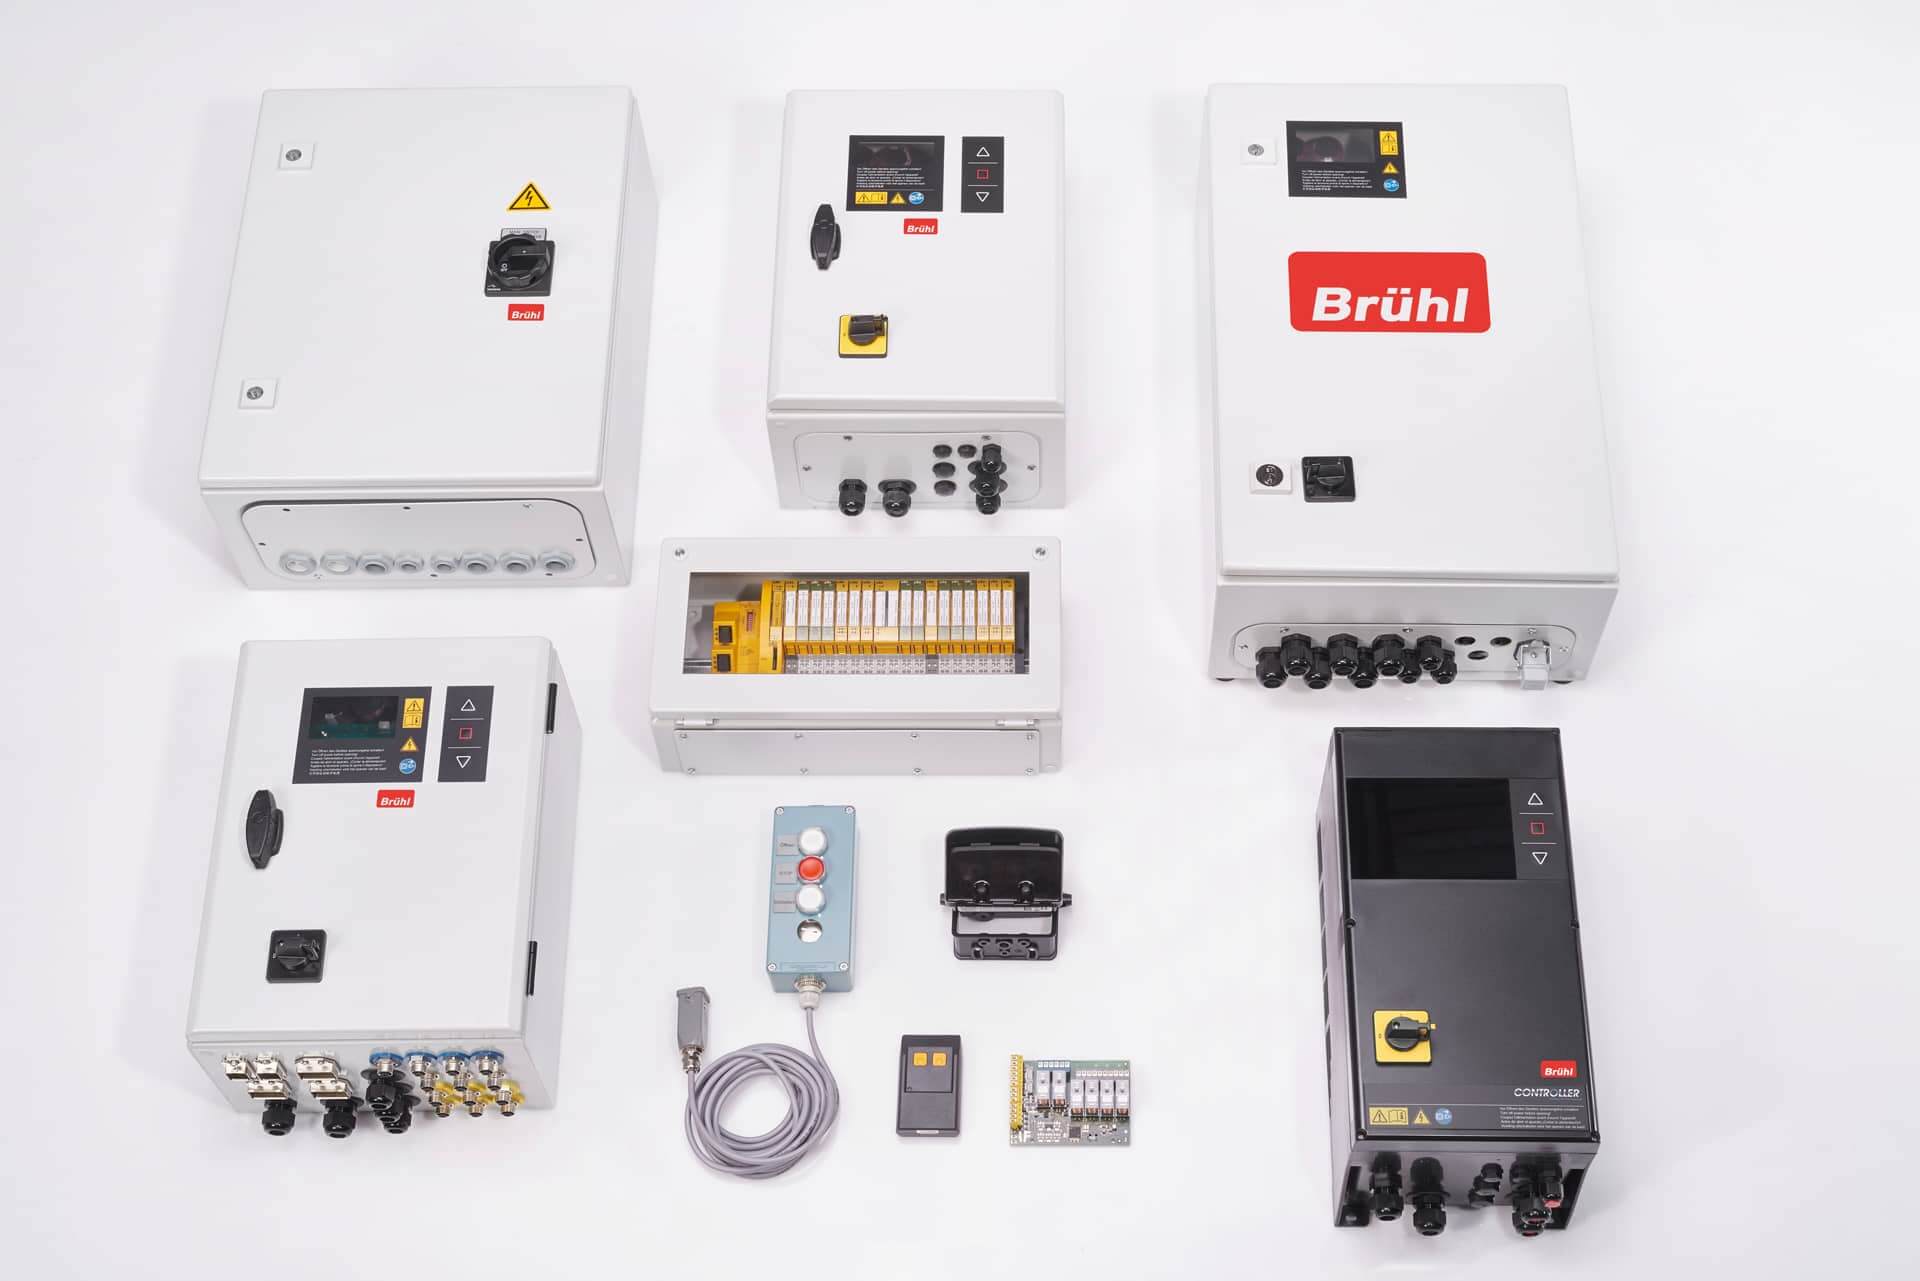 Overview of various control units and accessories